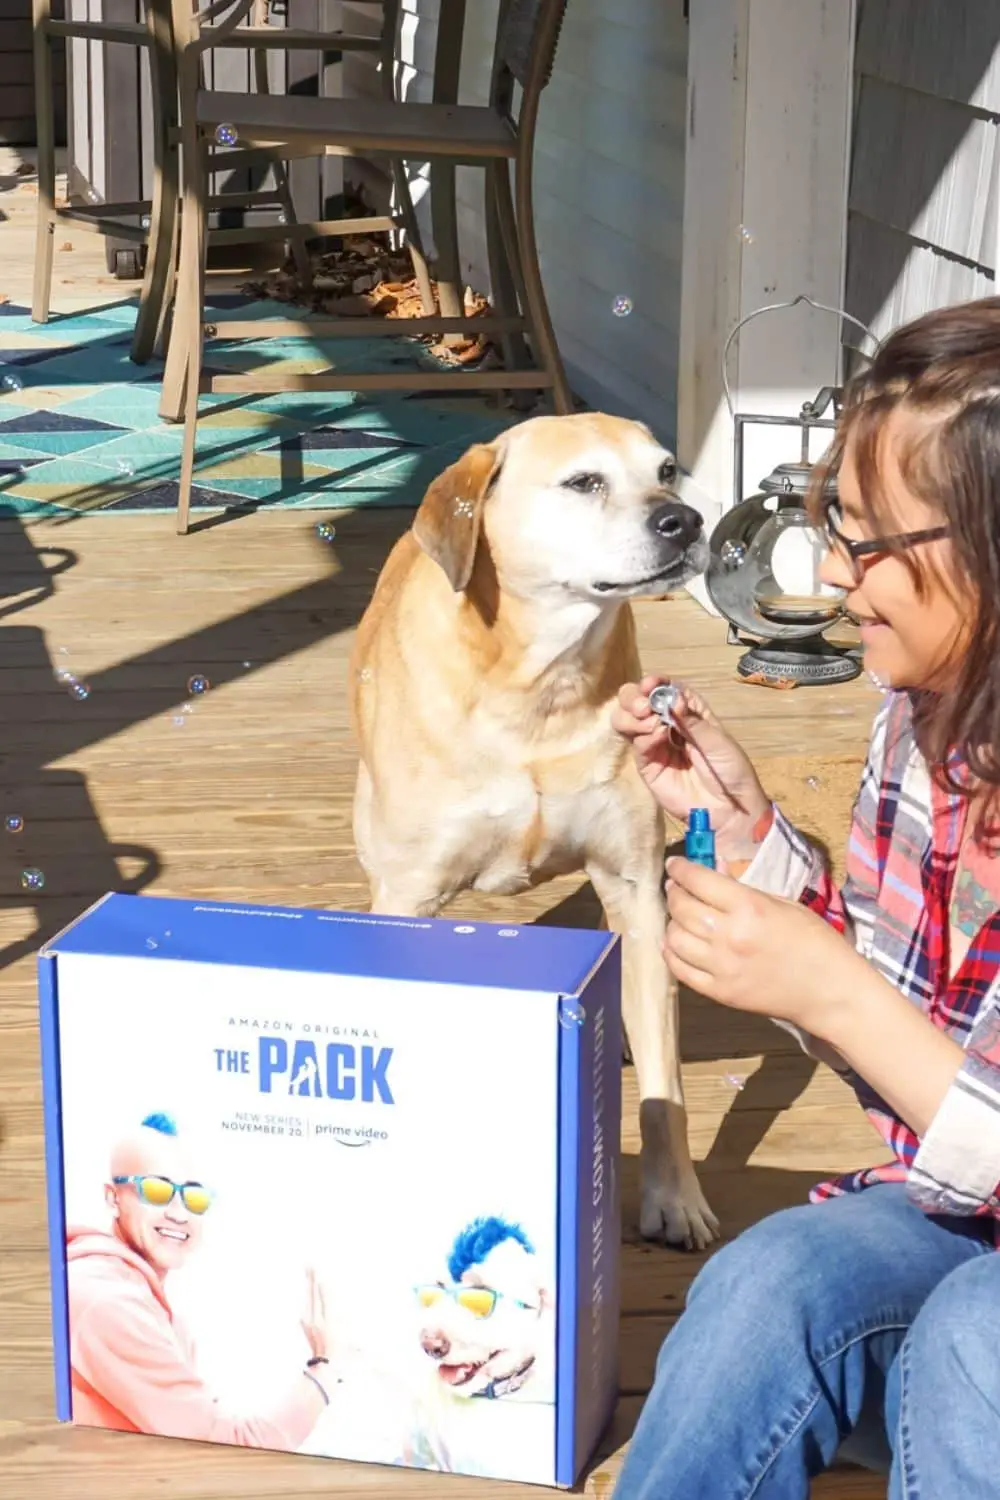 The Unconditional Love Between humans And Their Dogs: The Pack On Amazon Prime